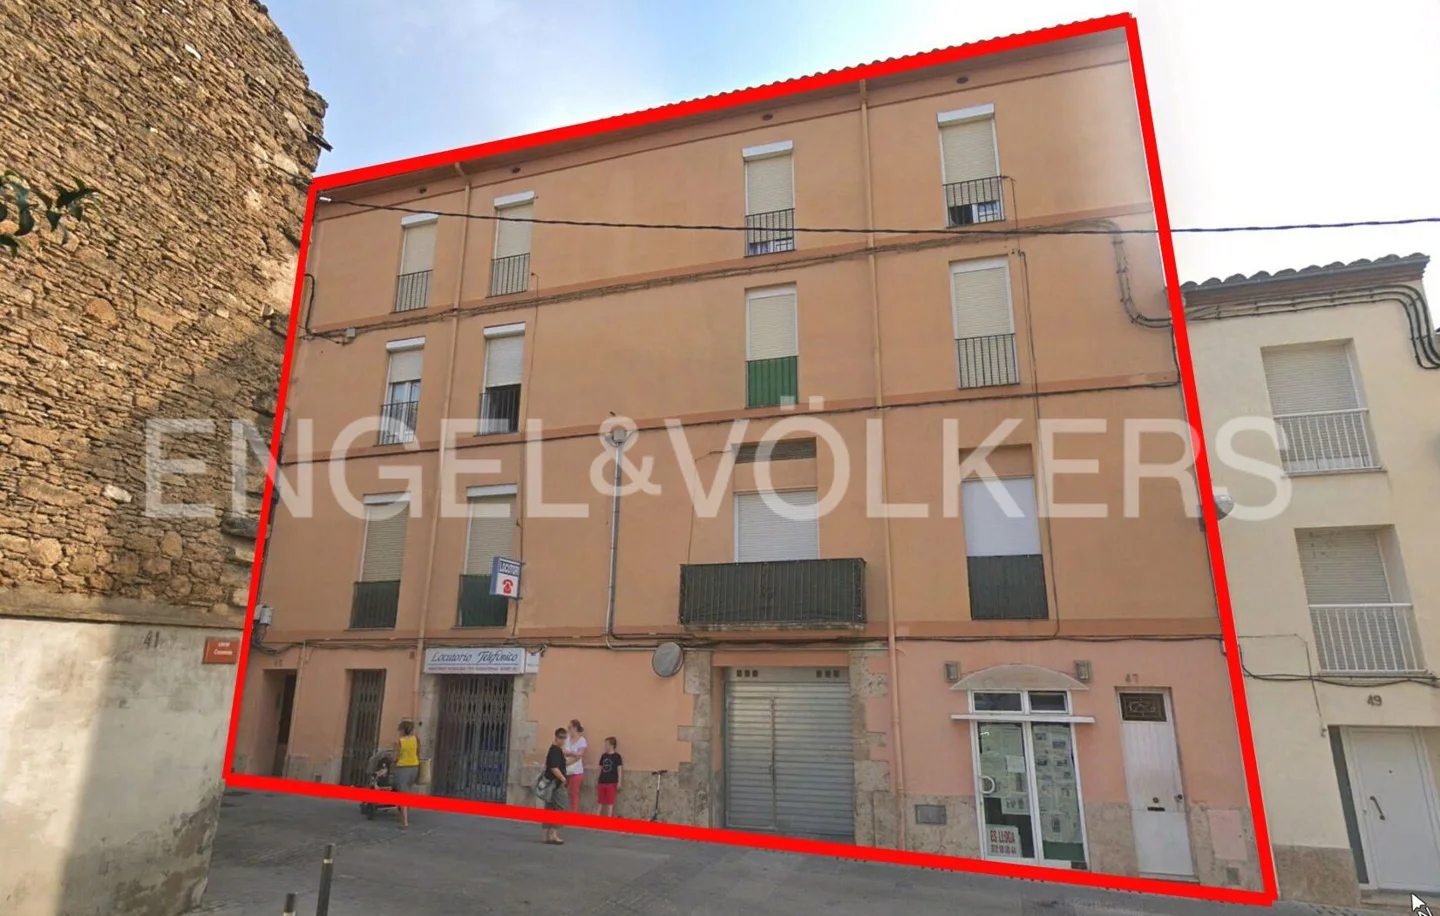 Entire building for sale in Banyoles